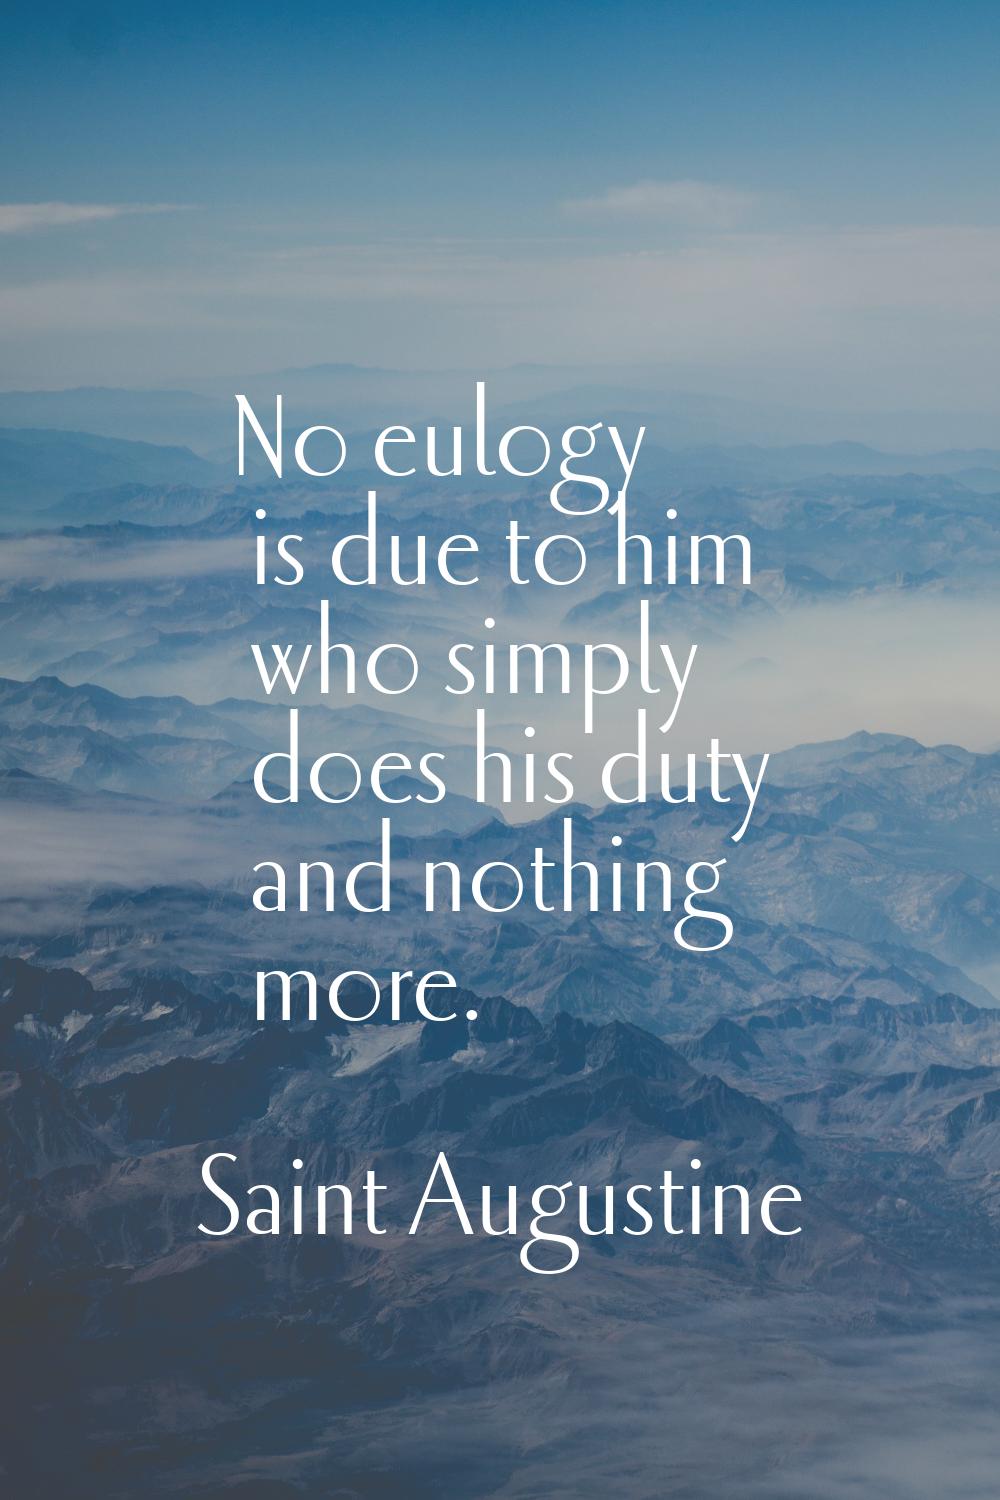 No eulogy is due to him who simply does his duty and nothing more.